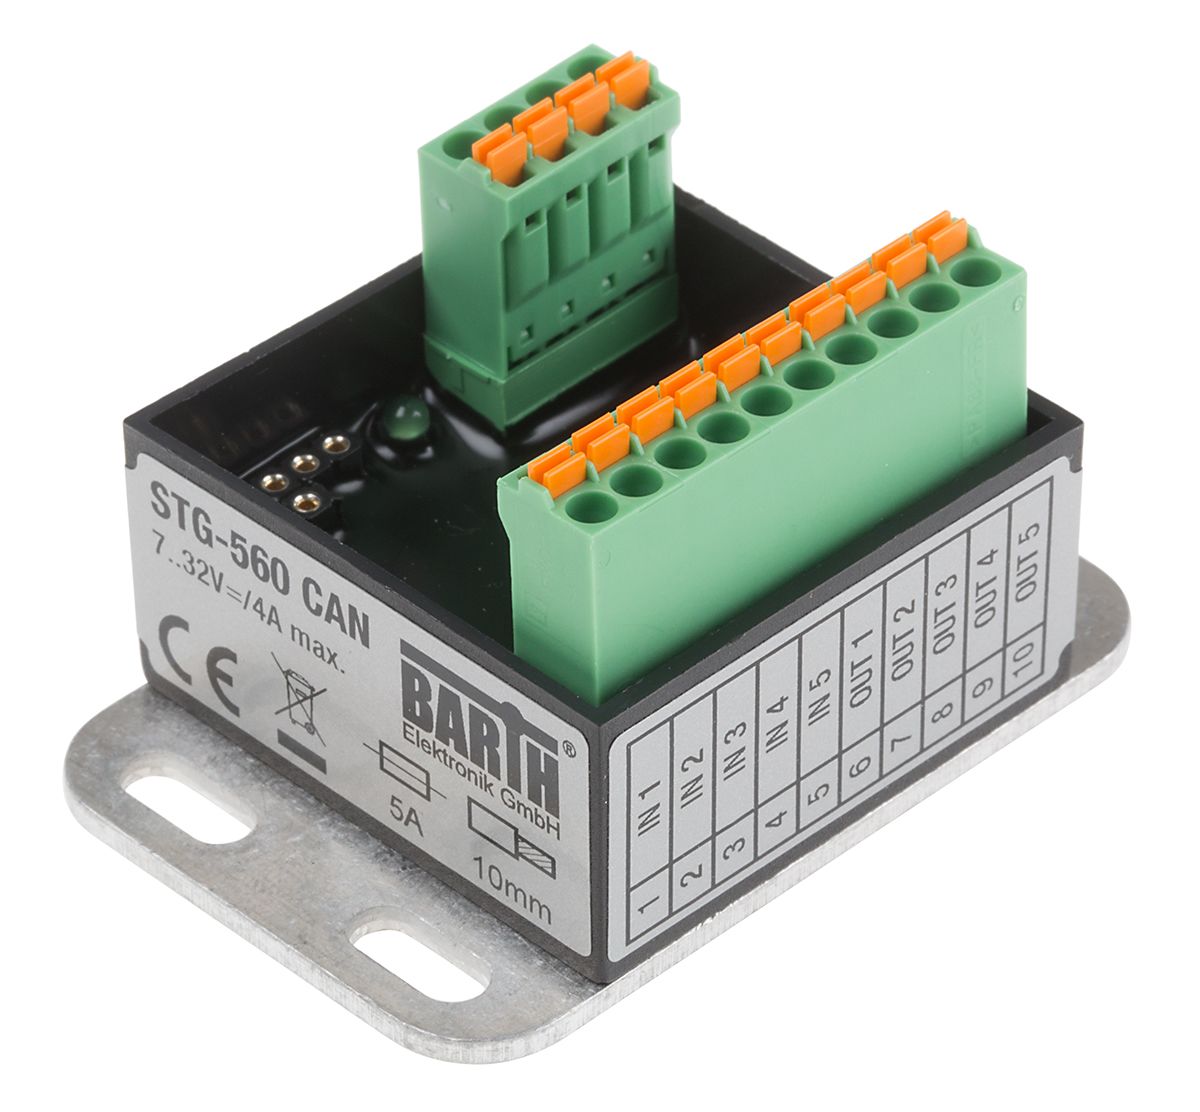 BARTH lococube mini-PLC PLC I/O Module - 5 Inputs, 5 Outputs, Digital, PWM, Solid State, For Use With STG-560, CANOpen